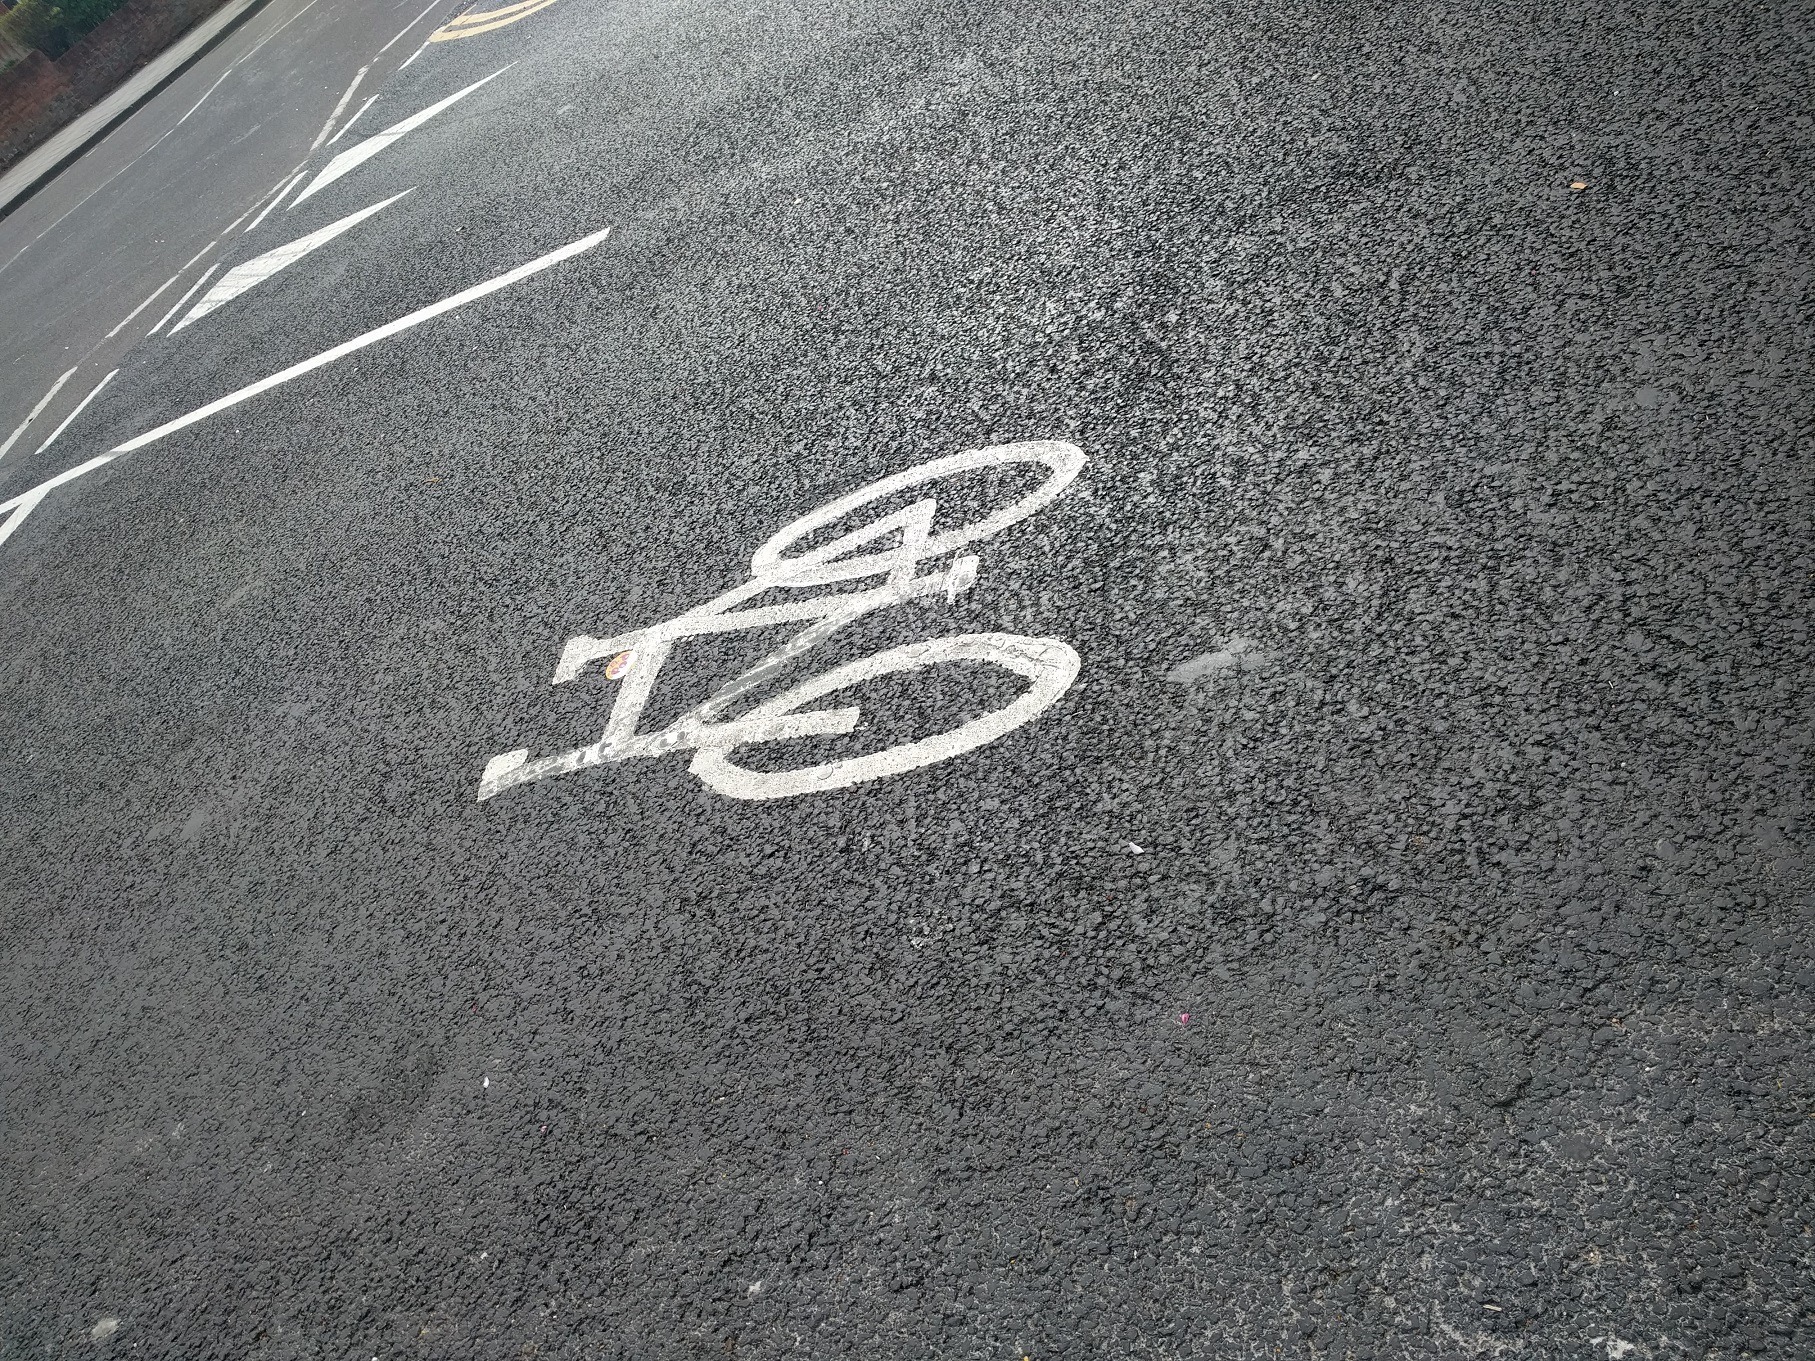 New cycling lane to be opened in Surbiton